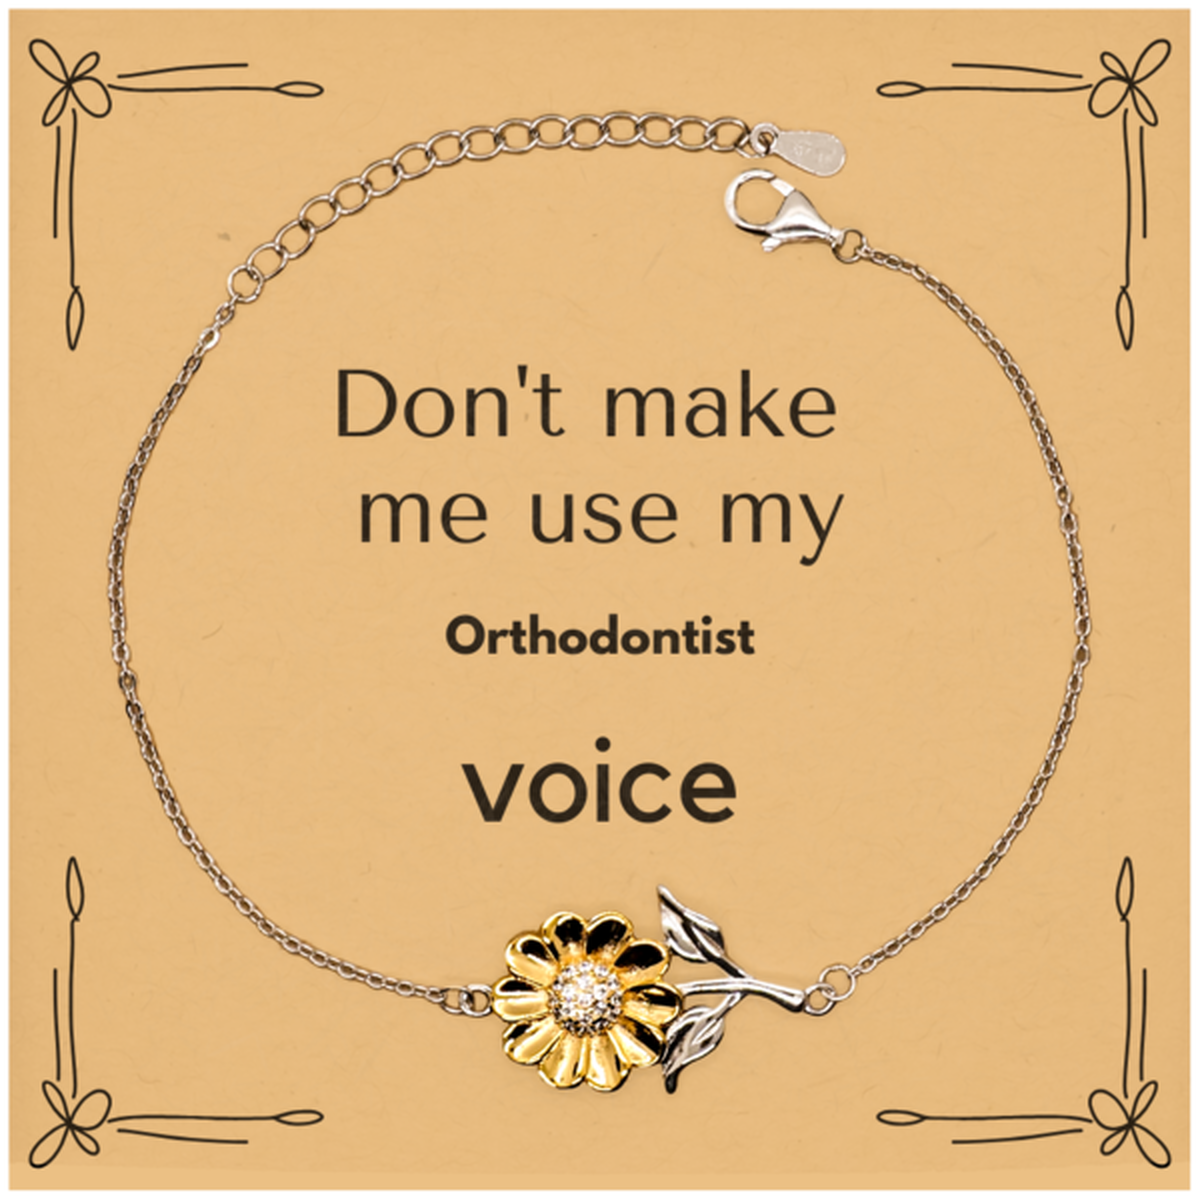 Don't make me use my Orthodontist voice, Sarcasm Orthodontist Card Gifts, Christmas Orthodontist Sunflower Bracelet Birthday Unique Gifts For Orthodontist Coworkers, Men, Women, Colleague, Friends